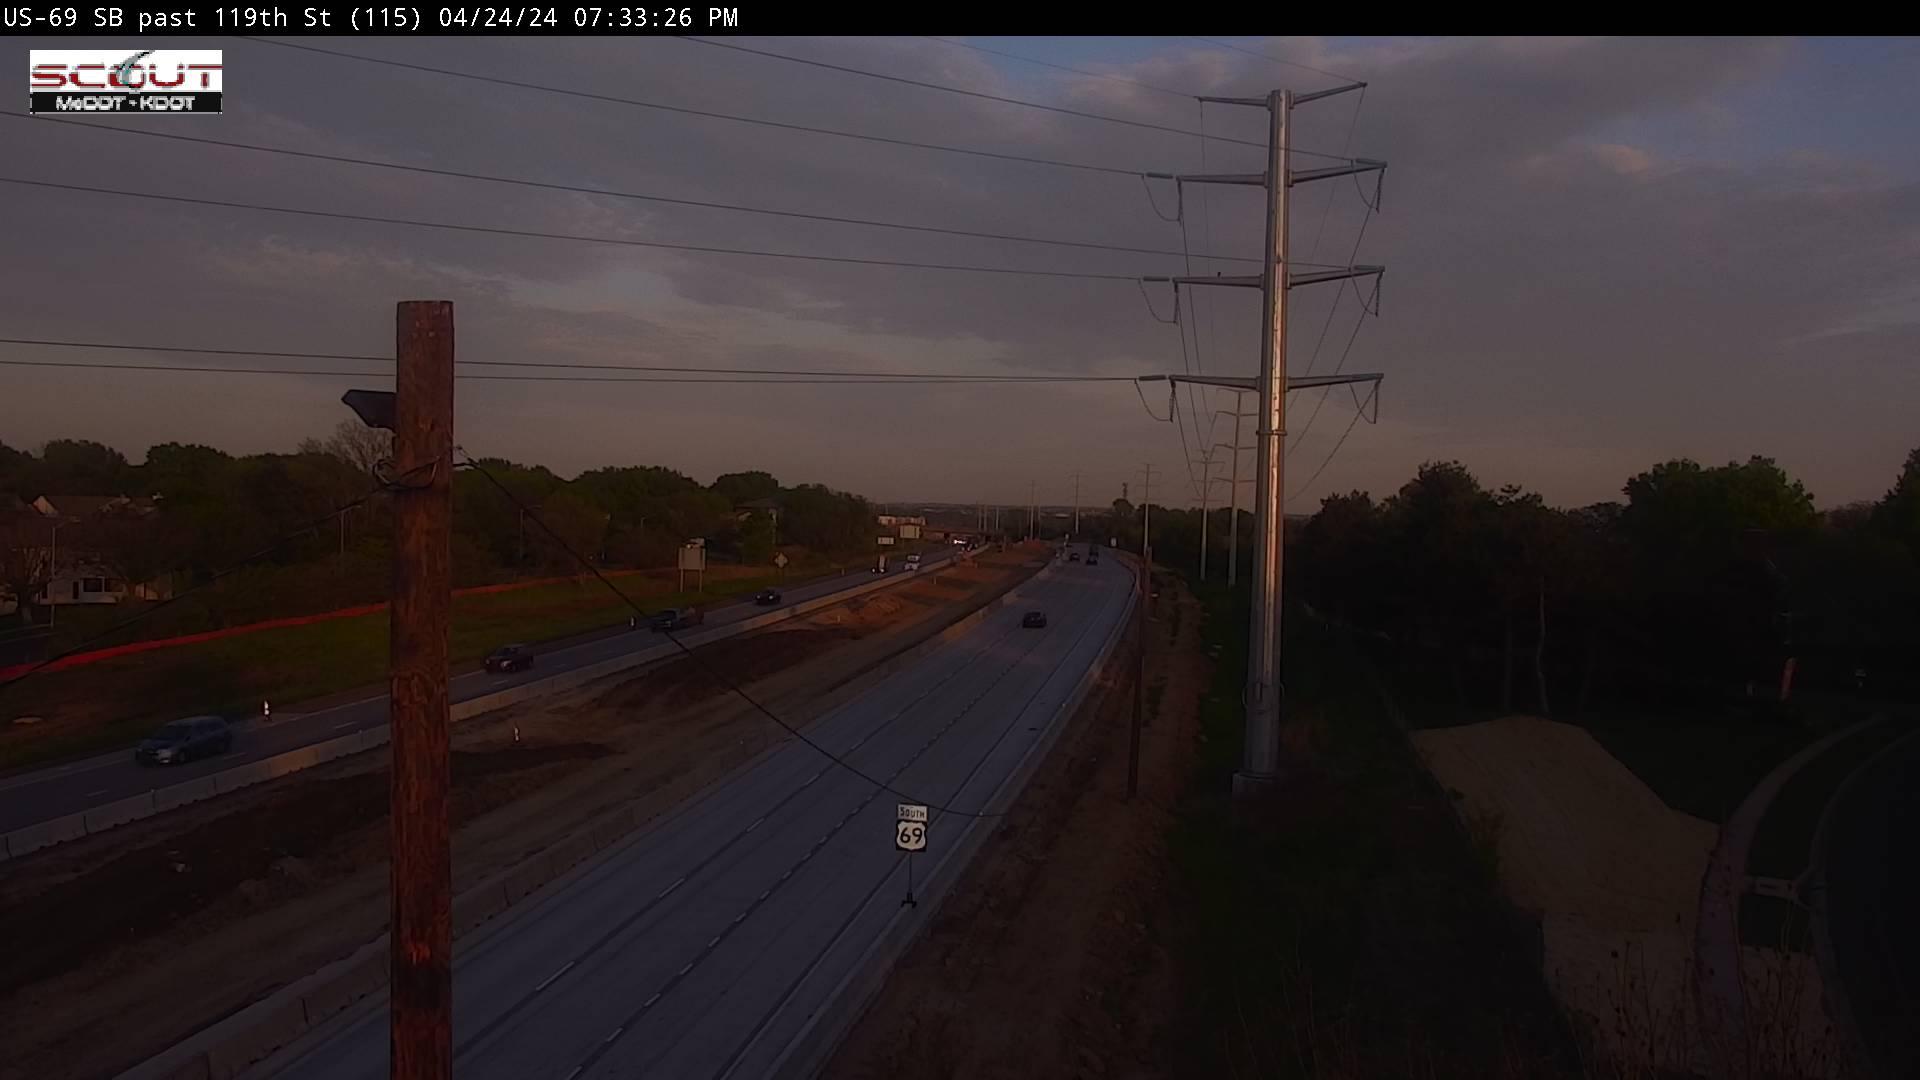 Traffic Cam Overland Park: US-69 S @ SOUTH OF 119TH ST